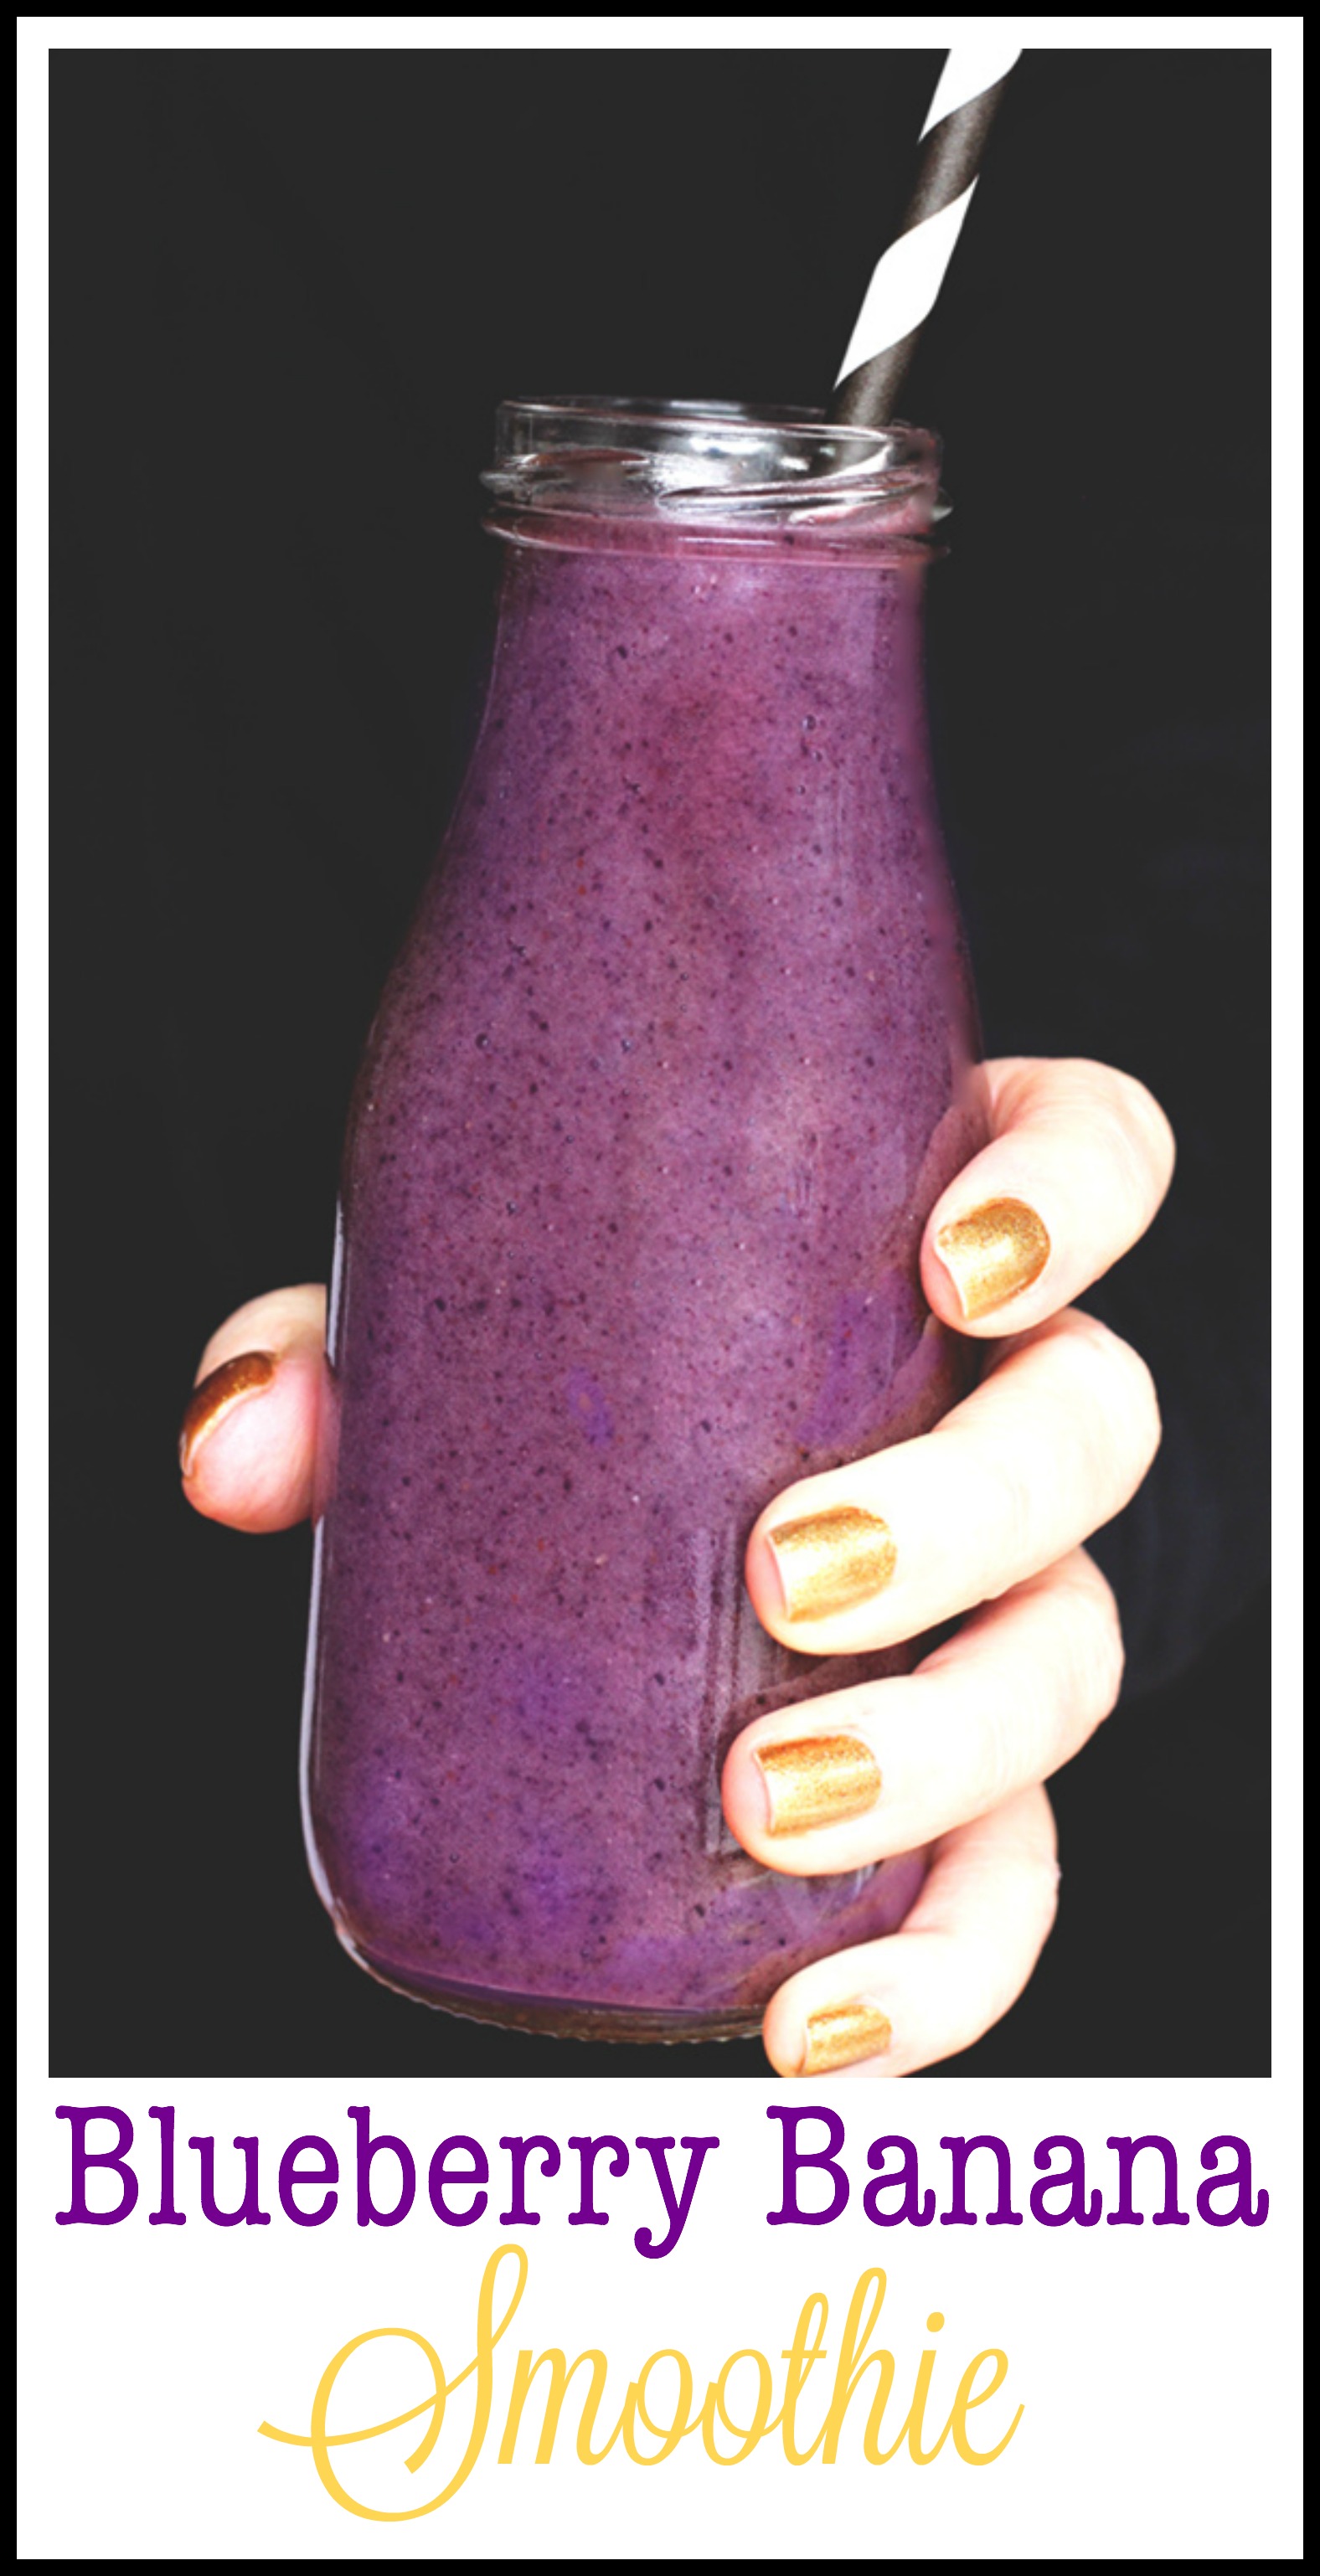 This Blueberry Banana Smoothie packs it all in with fresh organic fruit and a sweet taste that will help curb those unwanted cravings. NeuroticMommy.com #vegan #healthy #smoothie